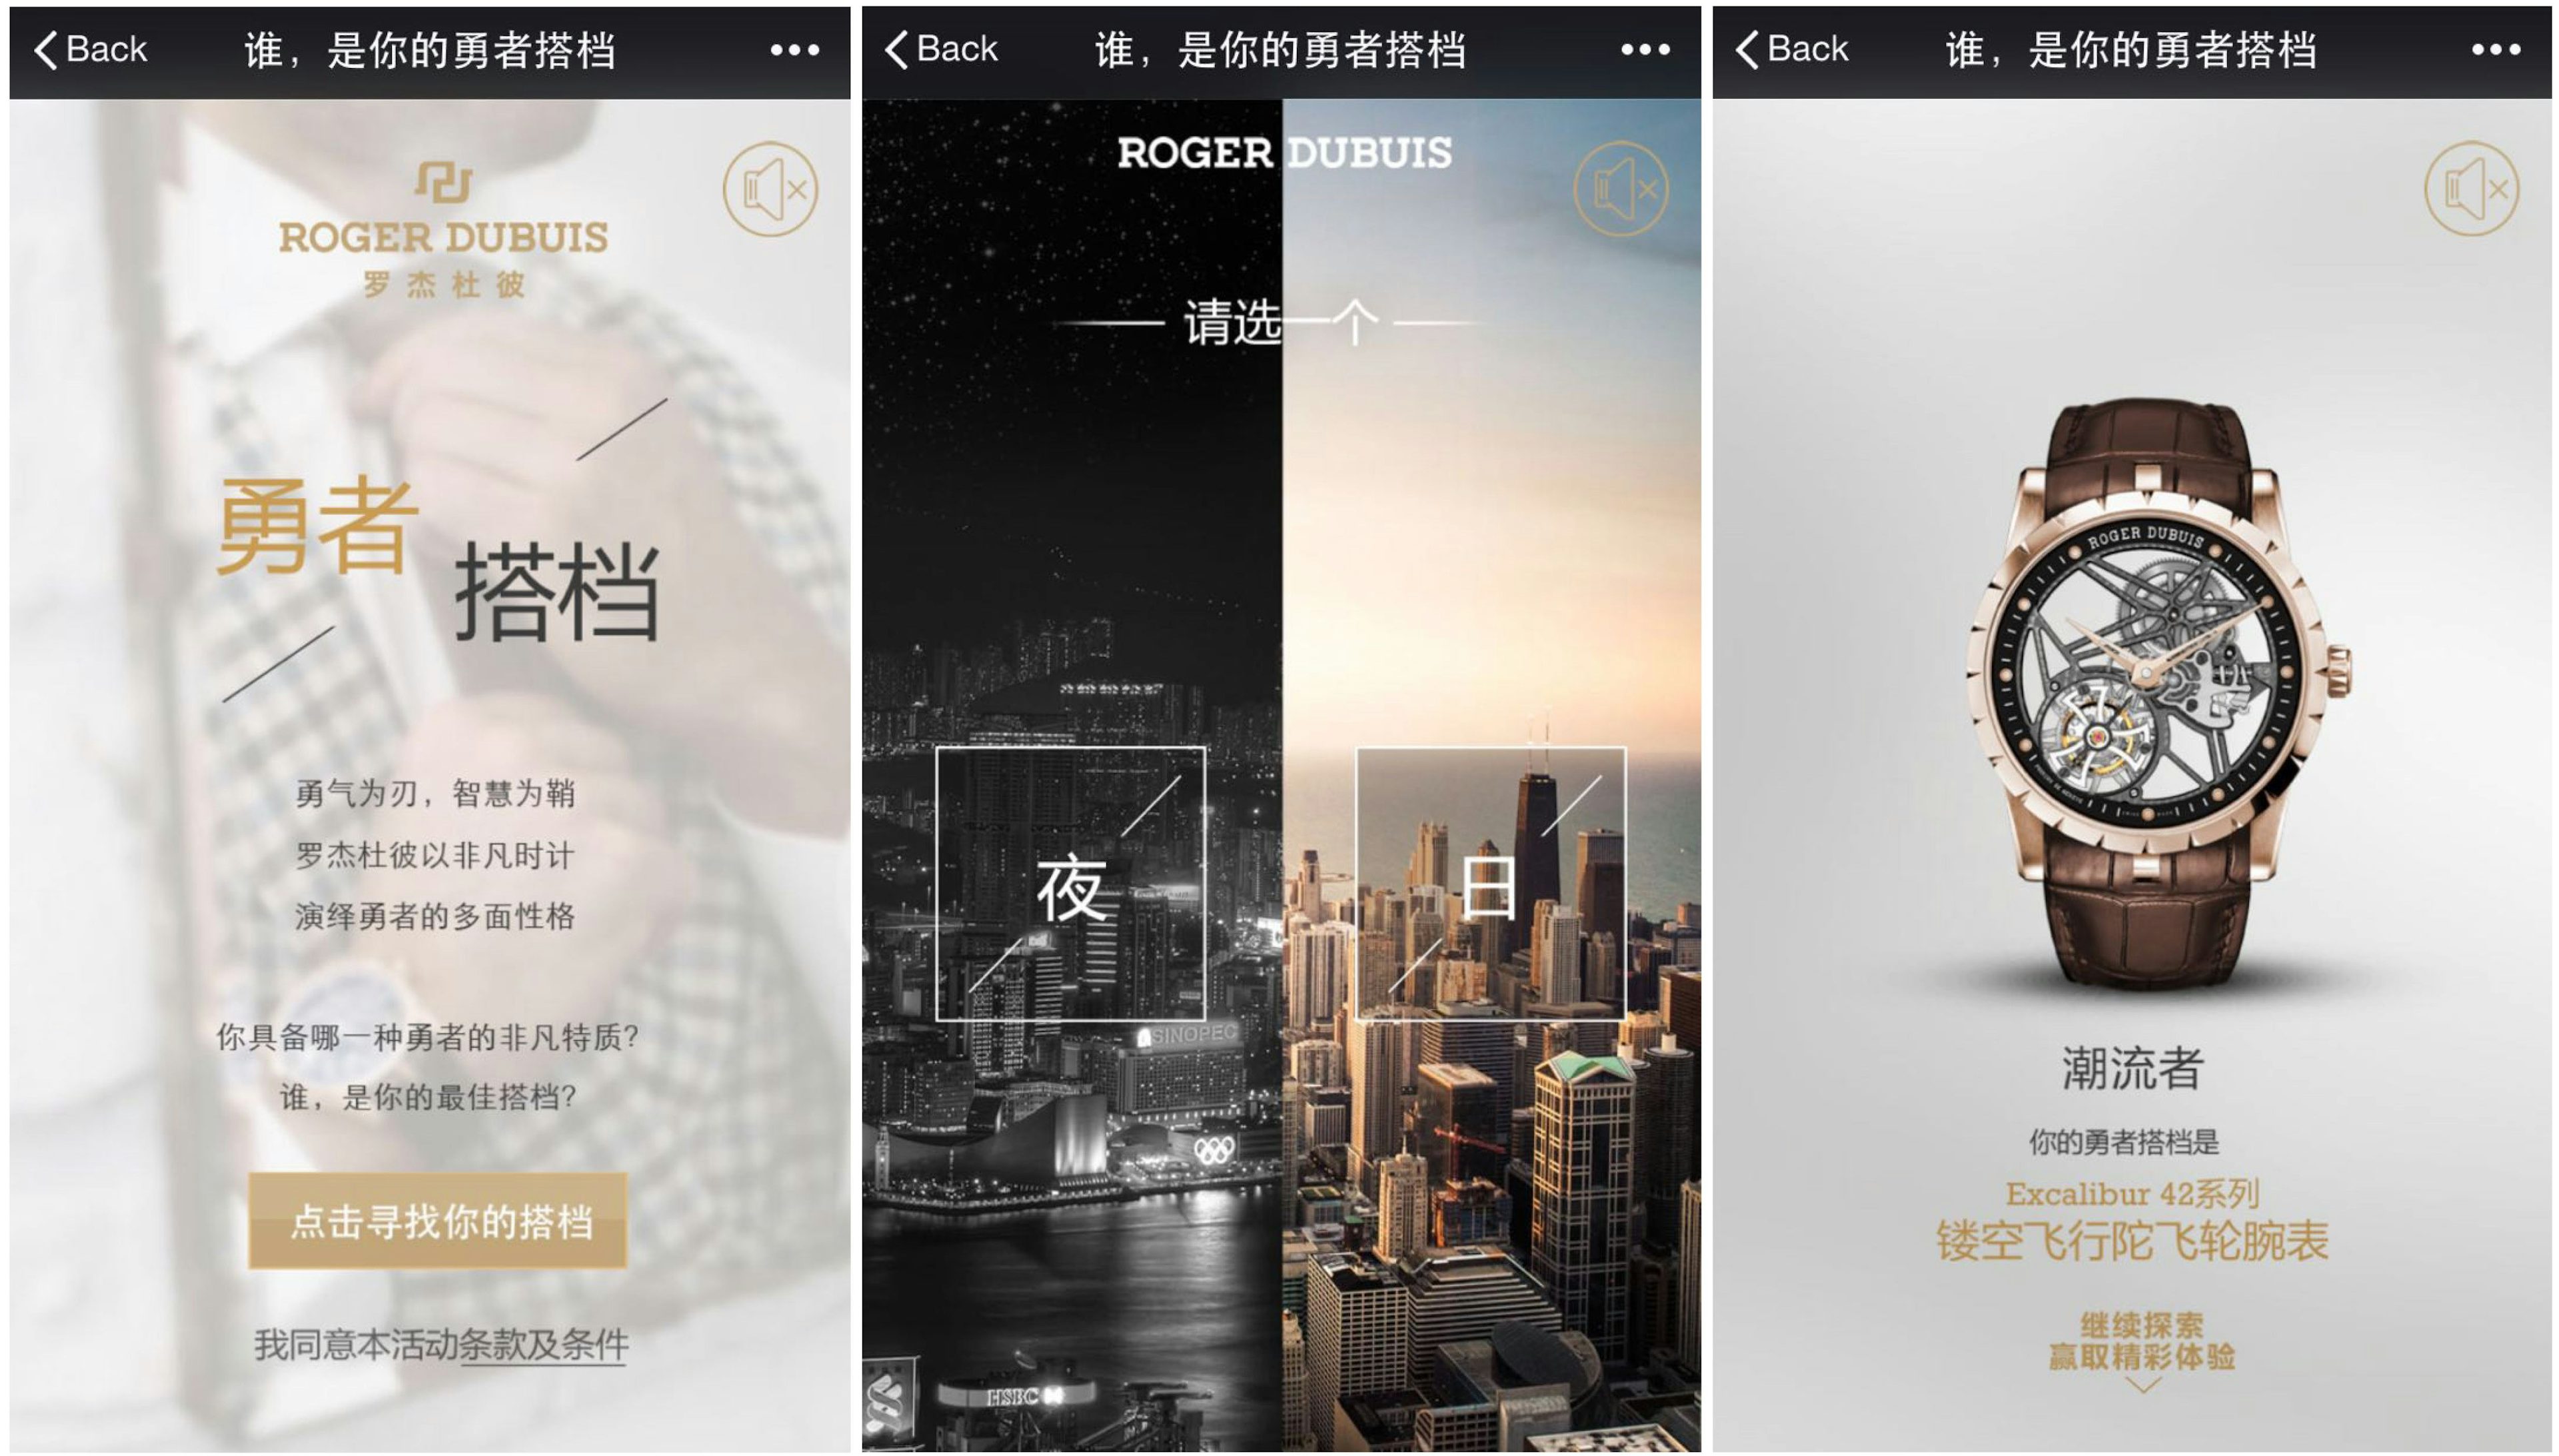 WeChat Campaign Spotlight: Roger Dubuis Promotes 'Daring' Identity with Interactive Promotion